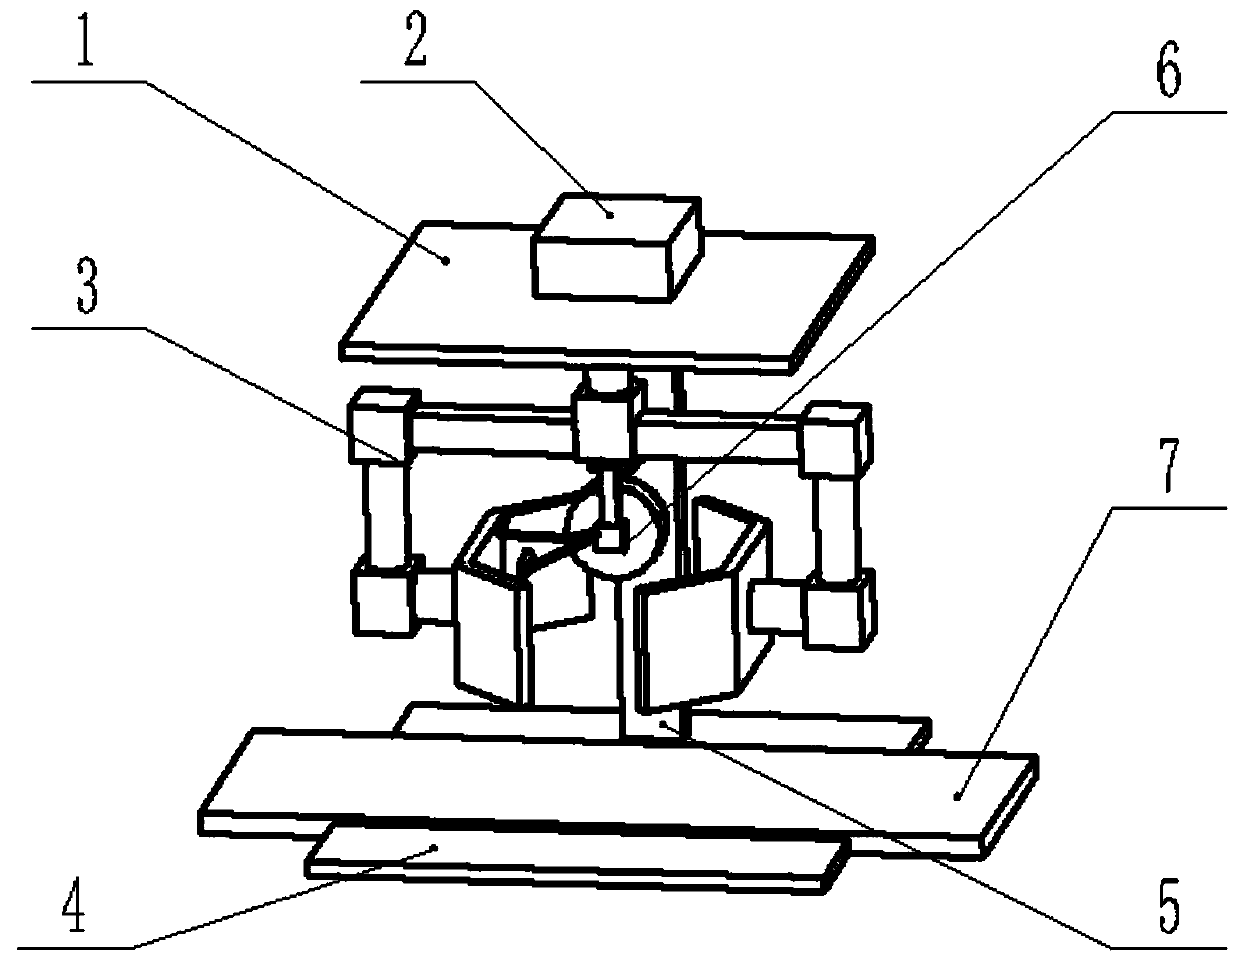 A single-sided adhesive tape sealing device